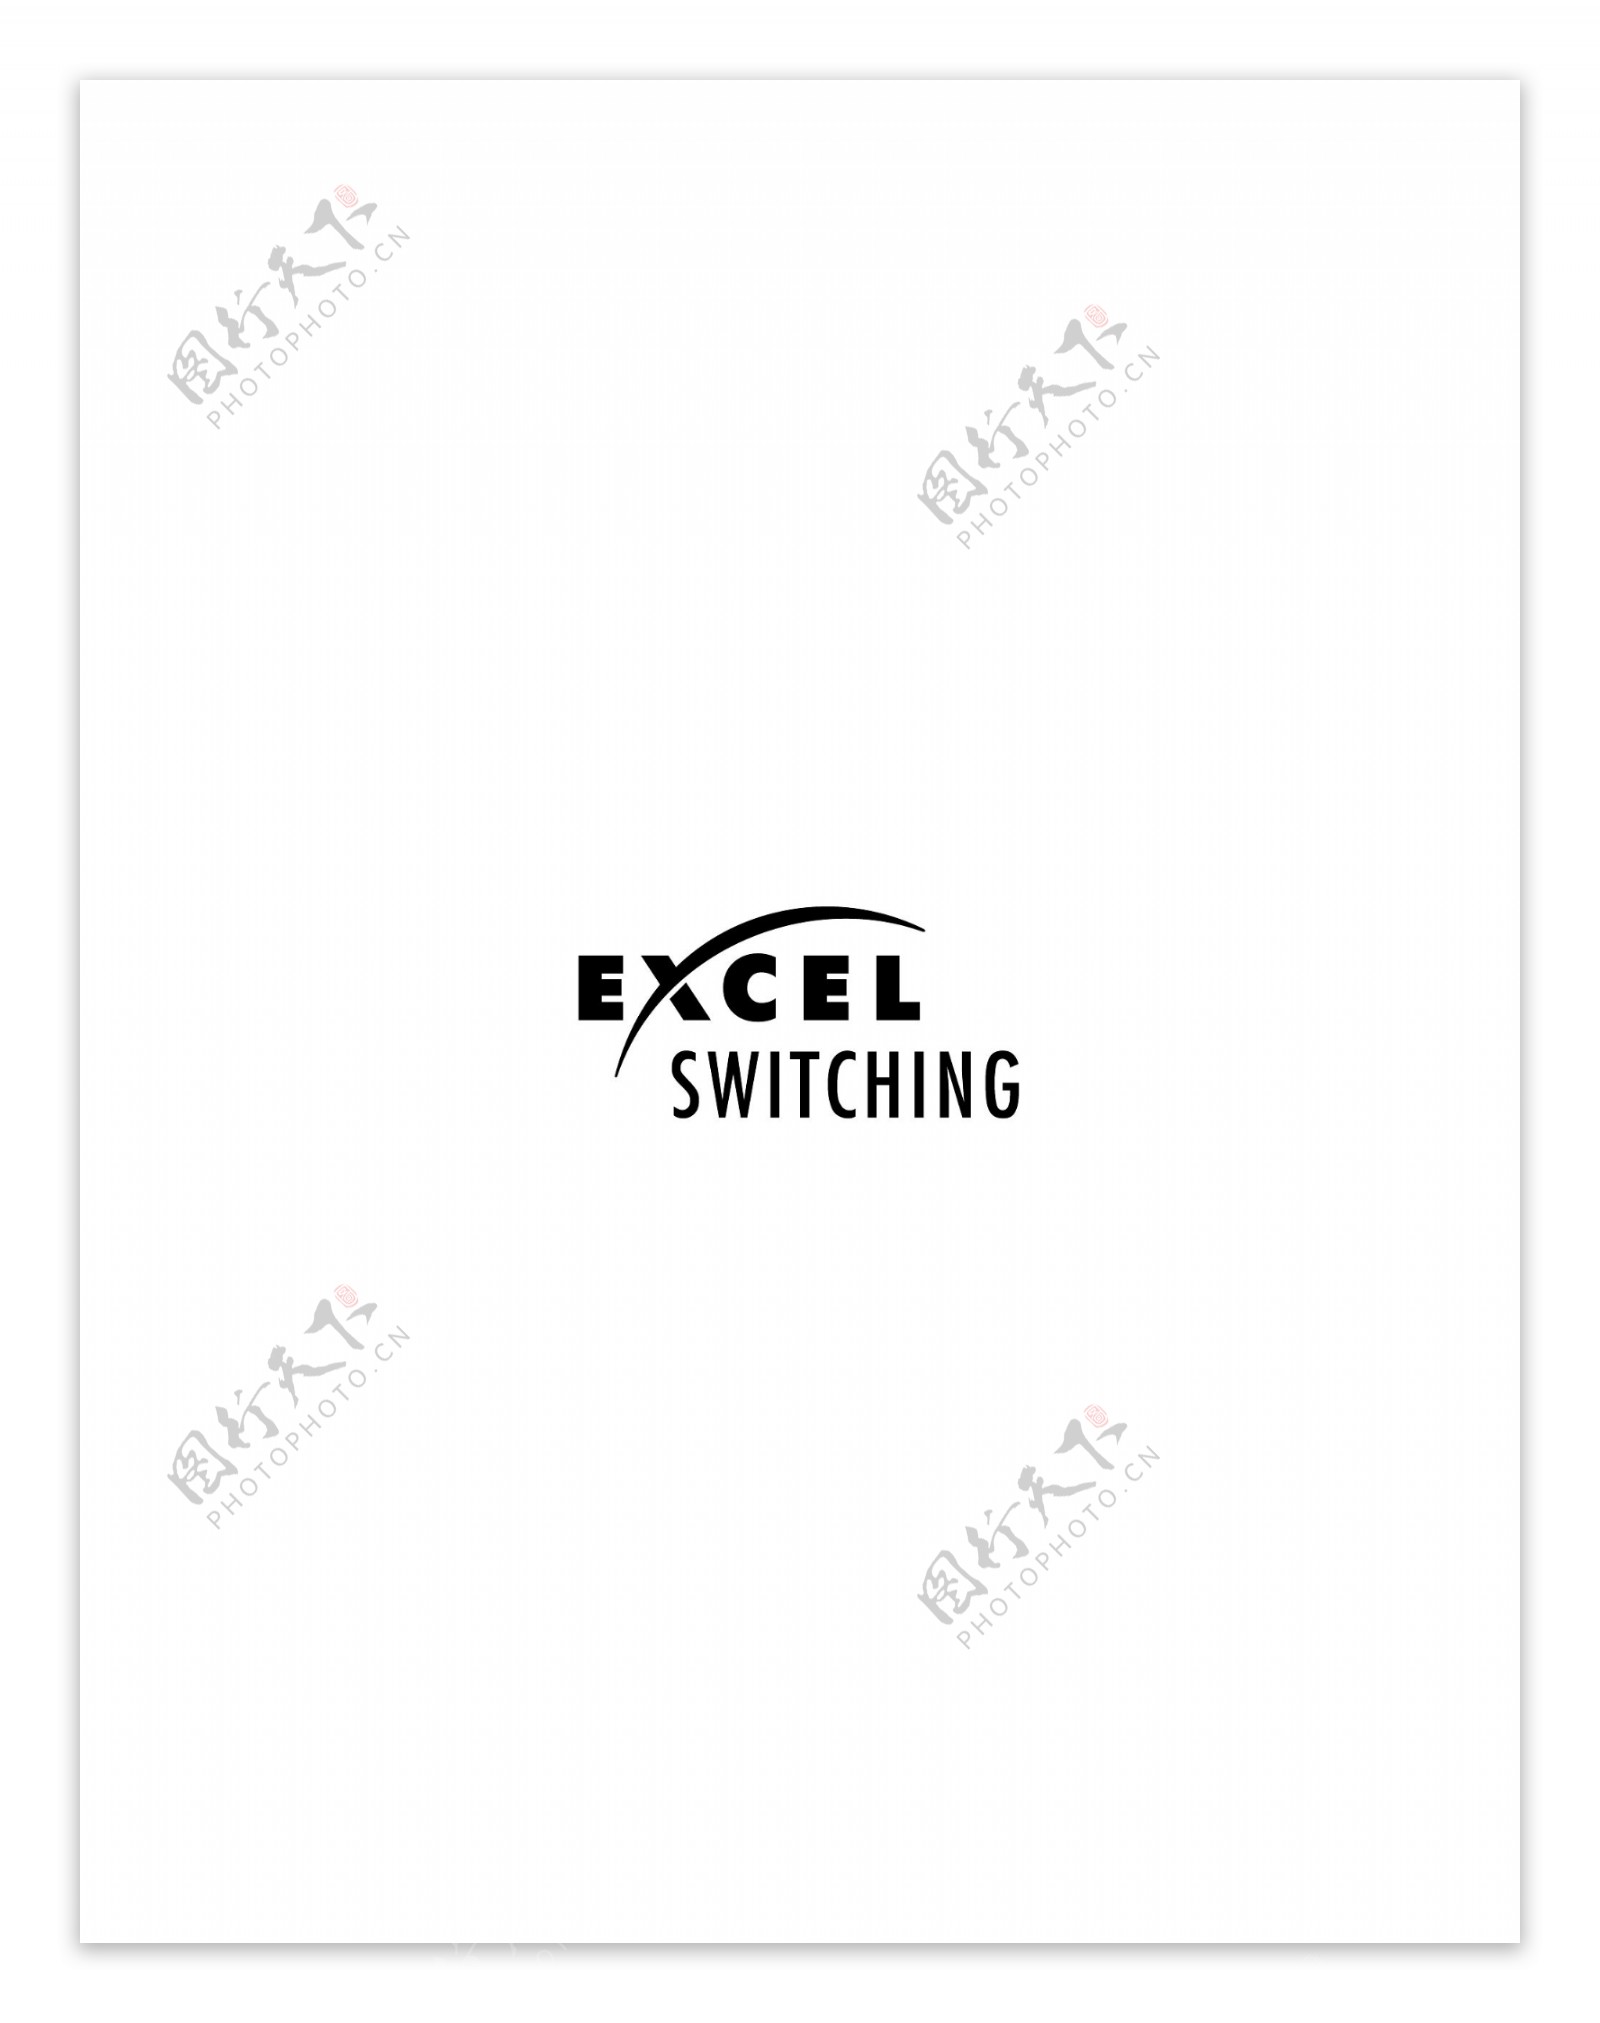 ExcelSwitchinglogo设计欣赏IT企业标志ExcelSwitching下载标志设计欣赏